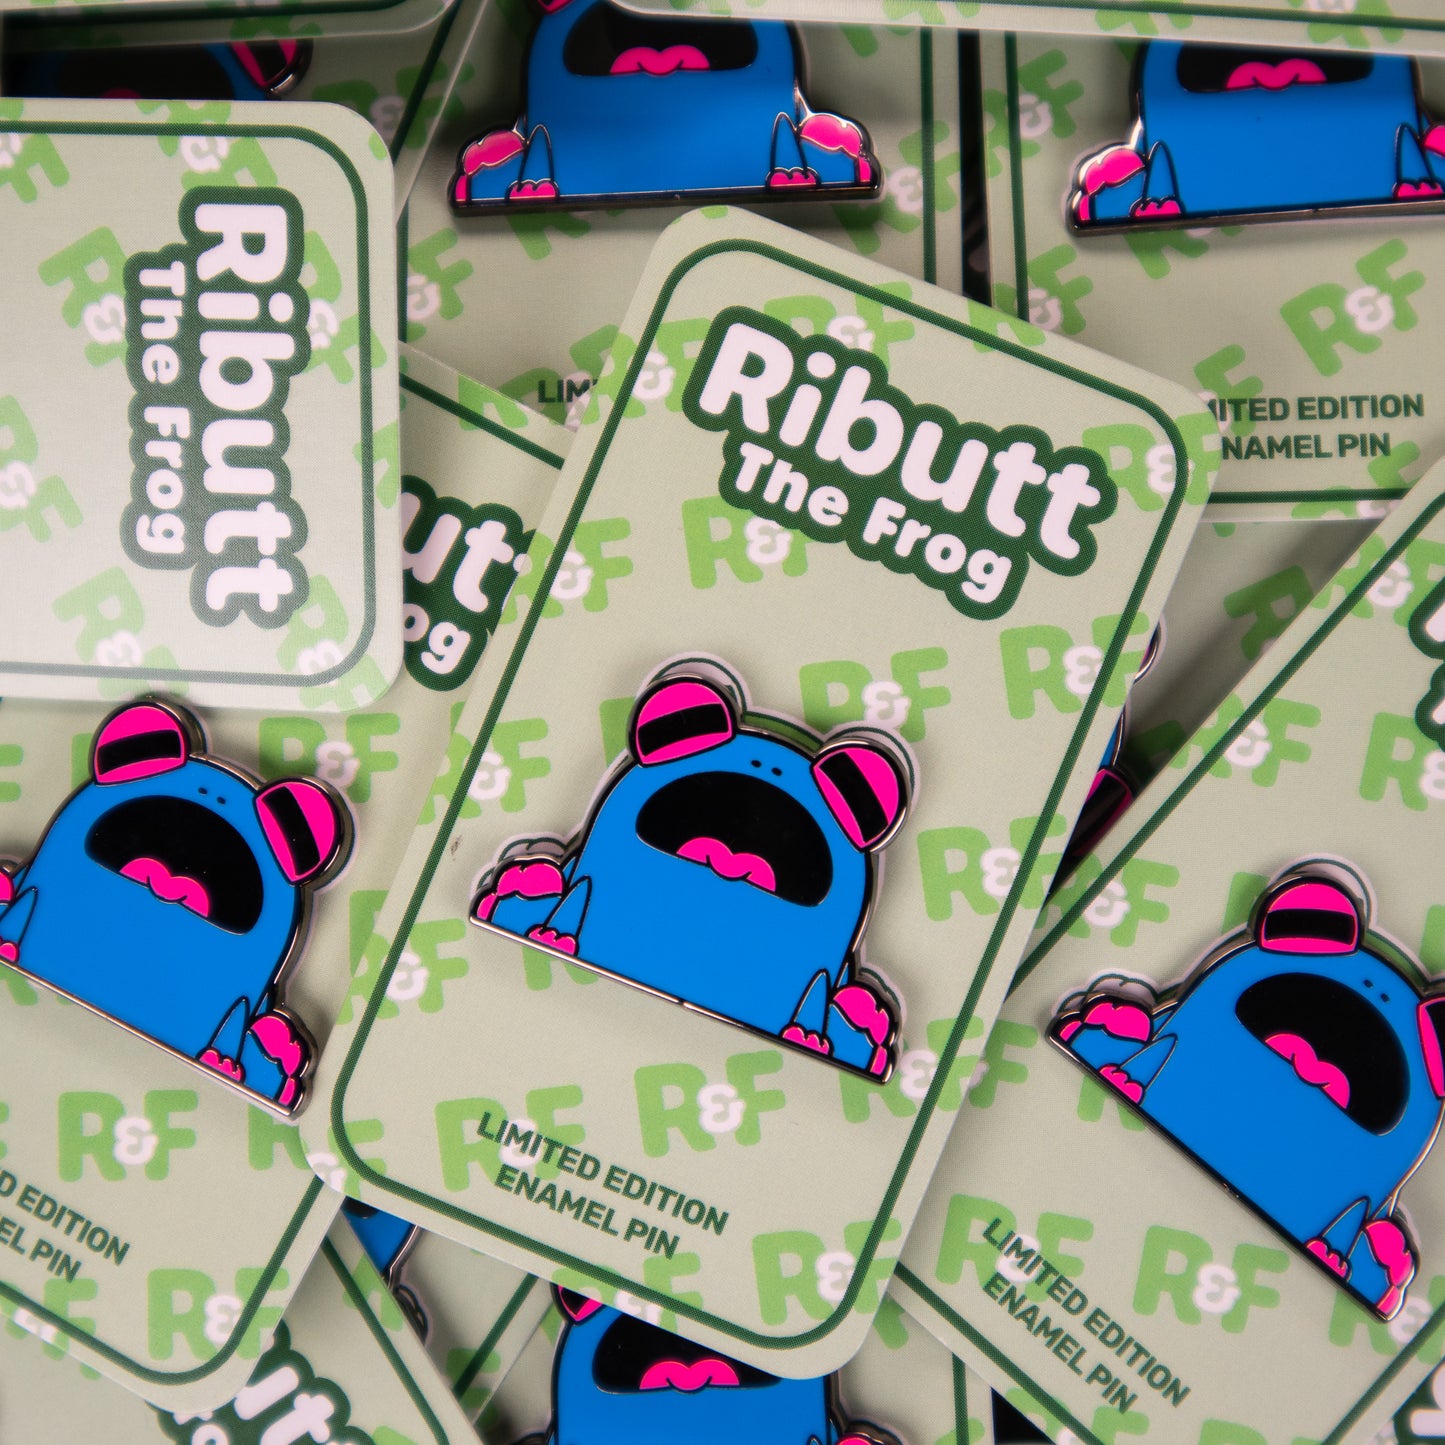 Ributt the Frog Sugar Pond Limited Edition Enamel Pin